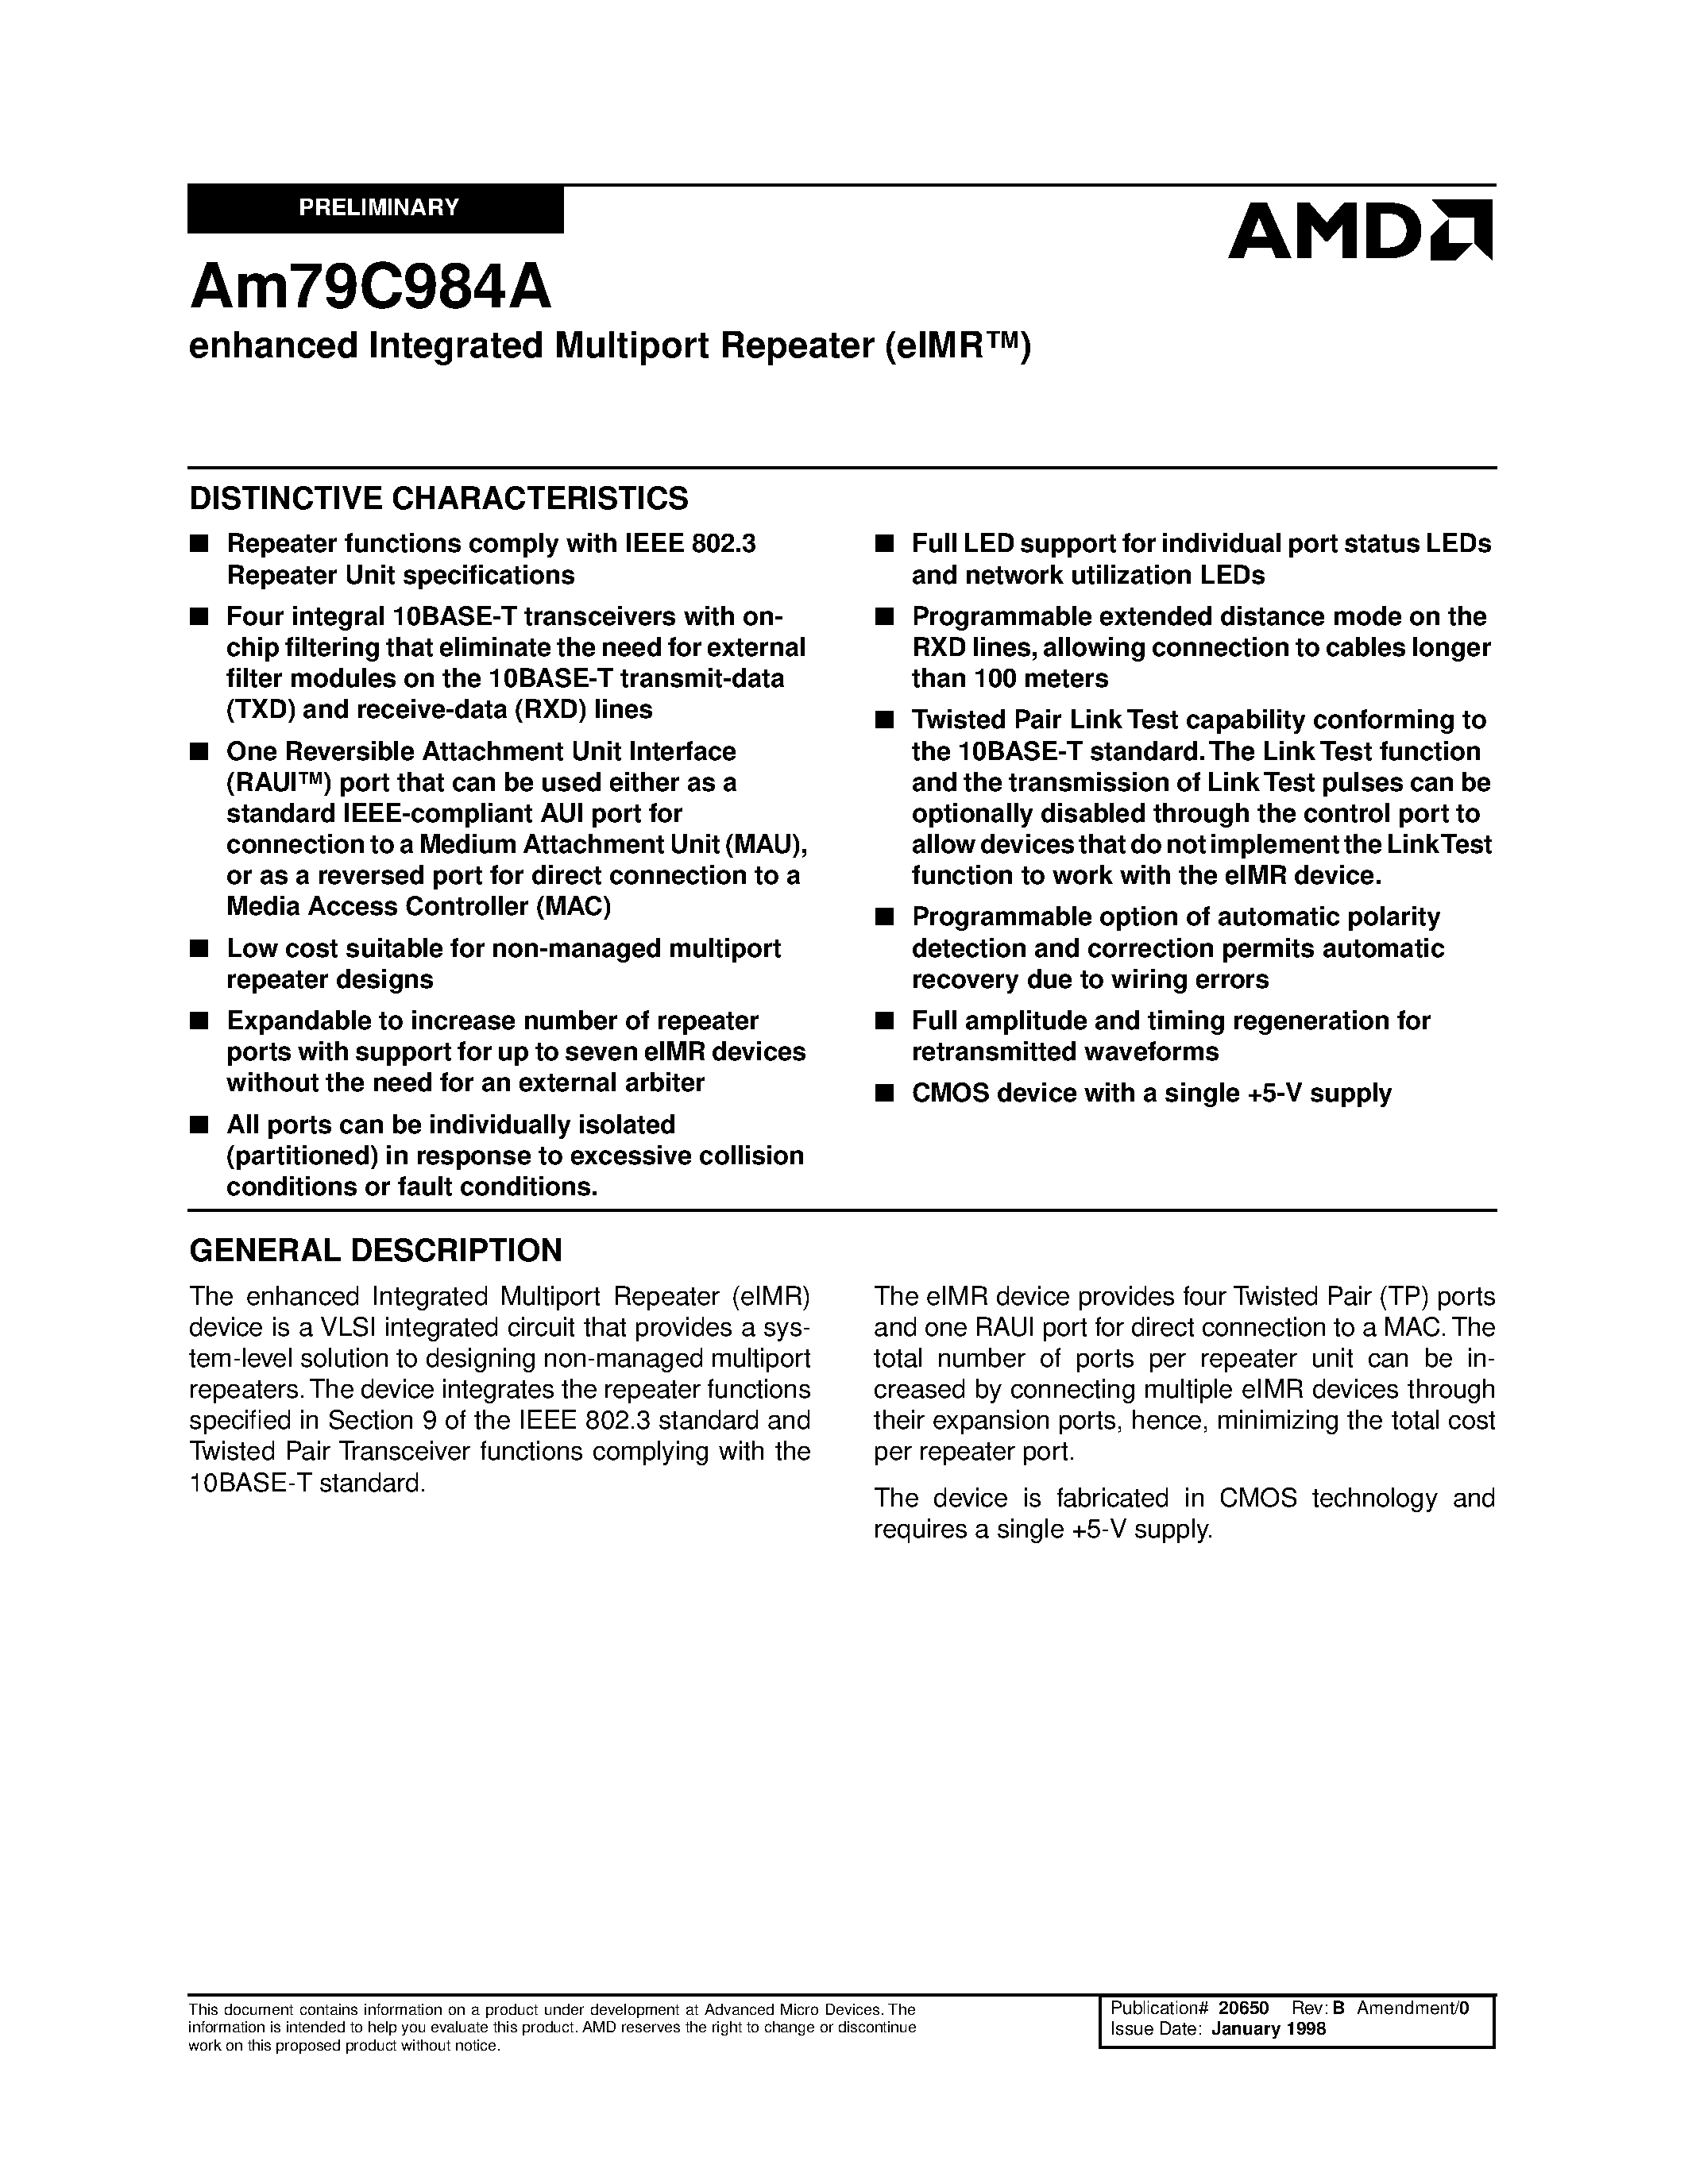 Datasheet AM79C984A - enhanced Integrated Multiport Repeater (eIMR) page 1